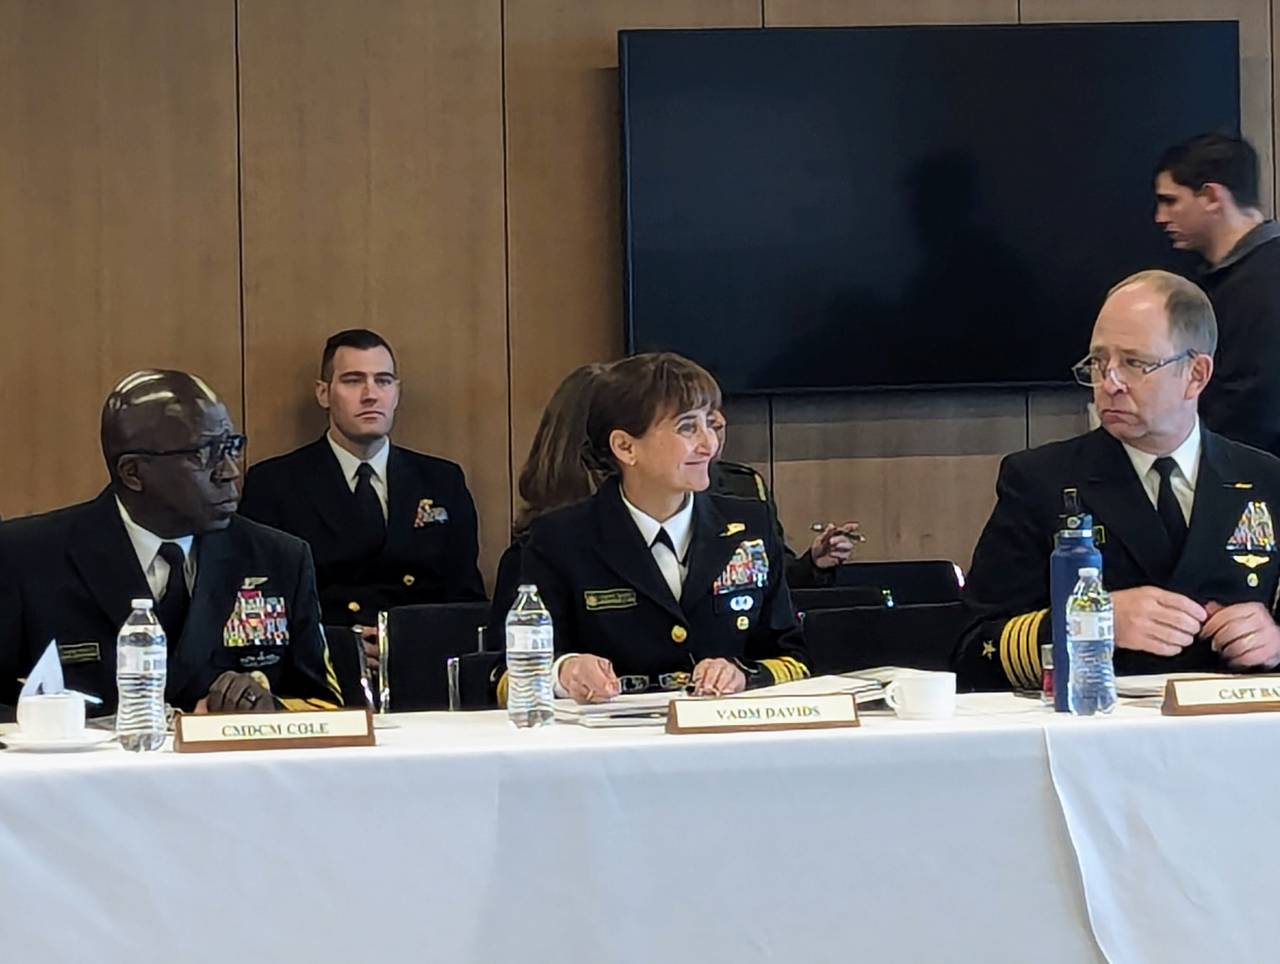 Vice Adm. Yvette Davids attended her first Naval Academy Board of Visitors meeting as superintendent on Tuesday, March 19 in Annapolis. She was flanked by, left, Command Master Chief Karim Cole and Capt. James Bates, deputy superintendent.